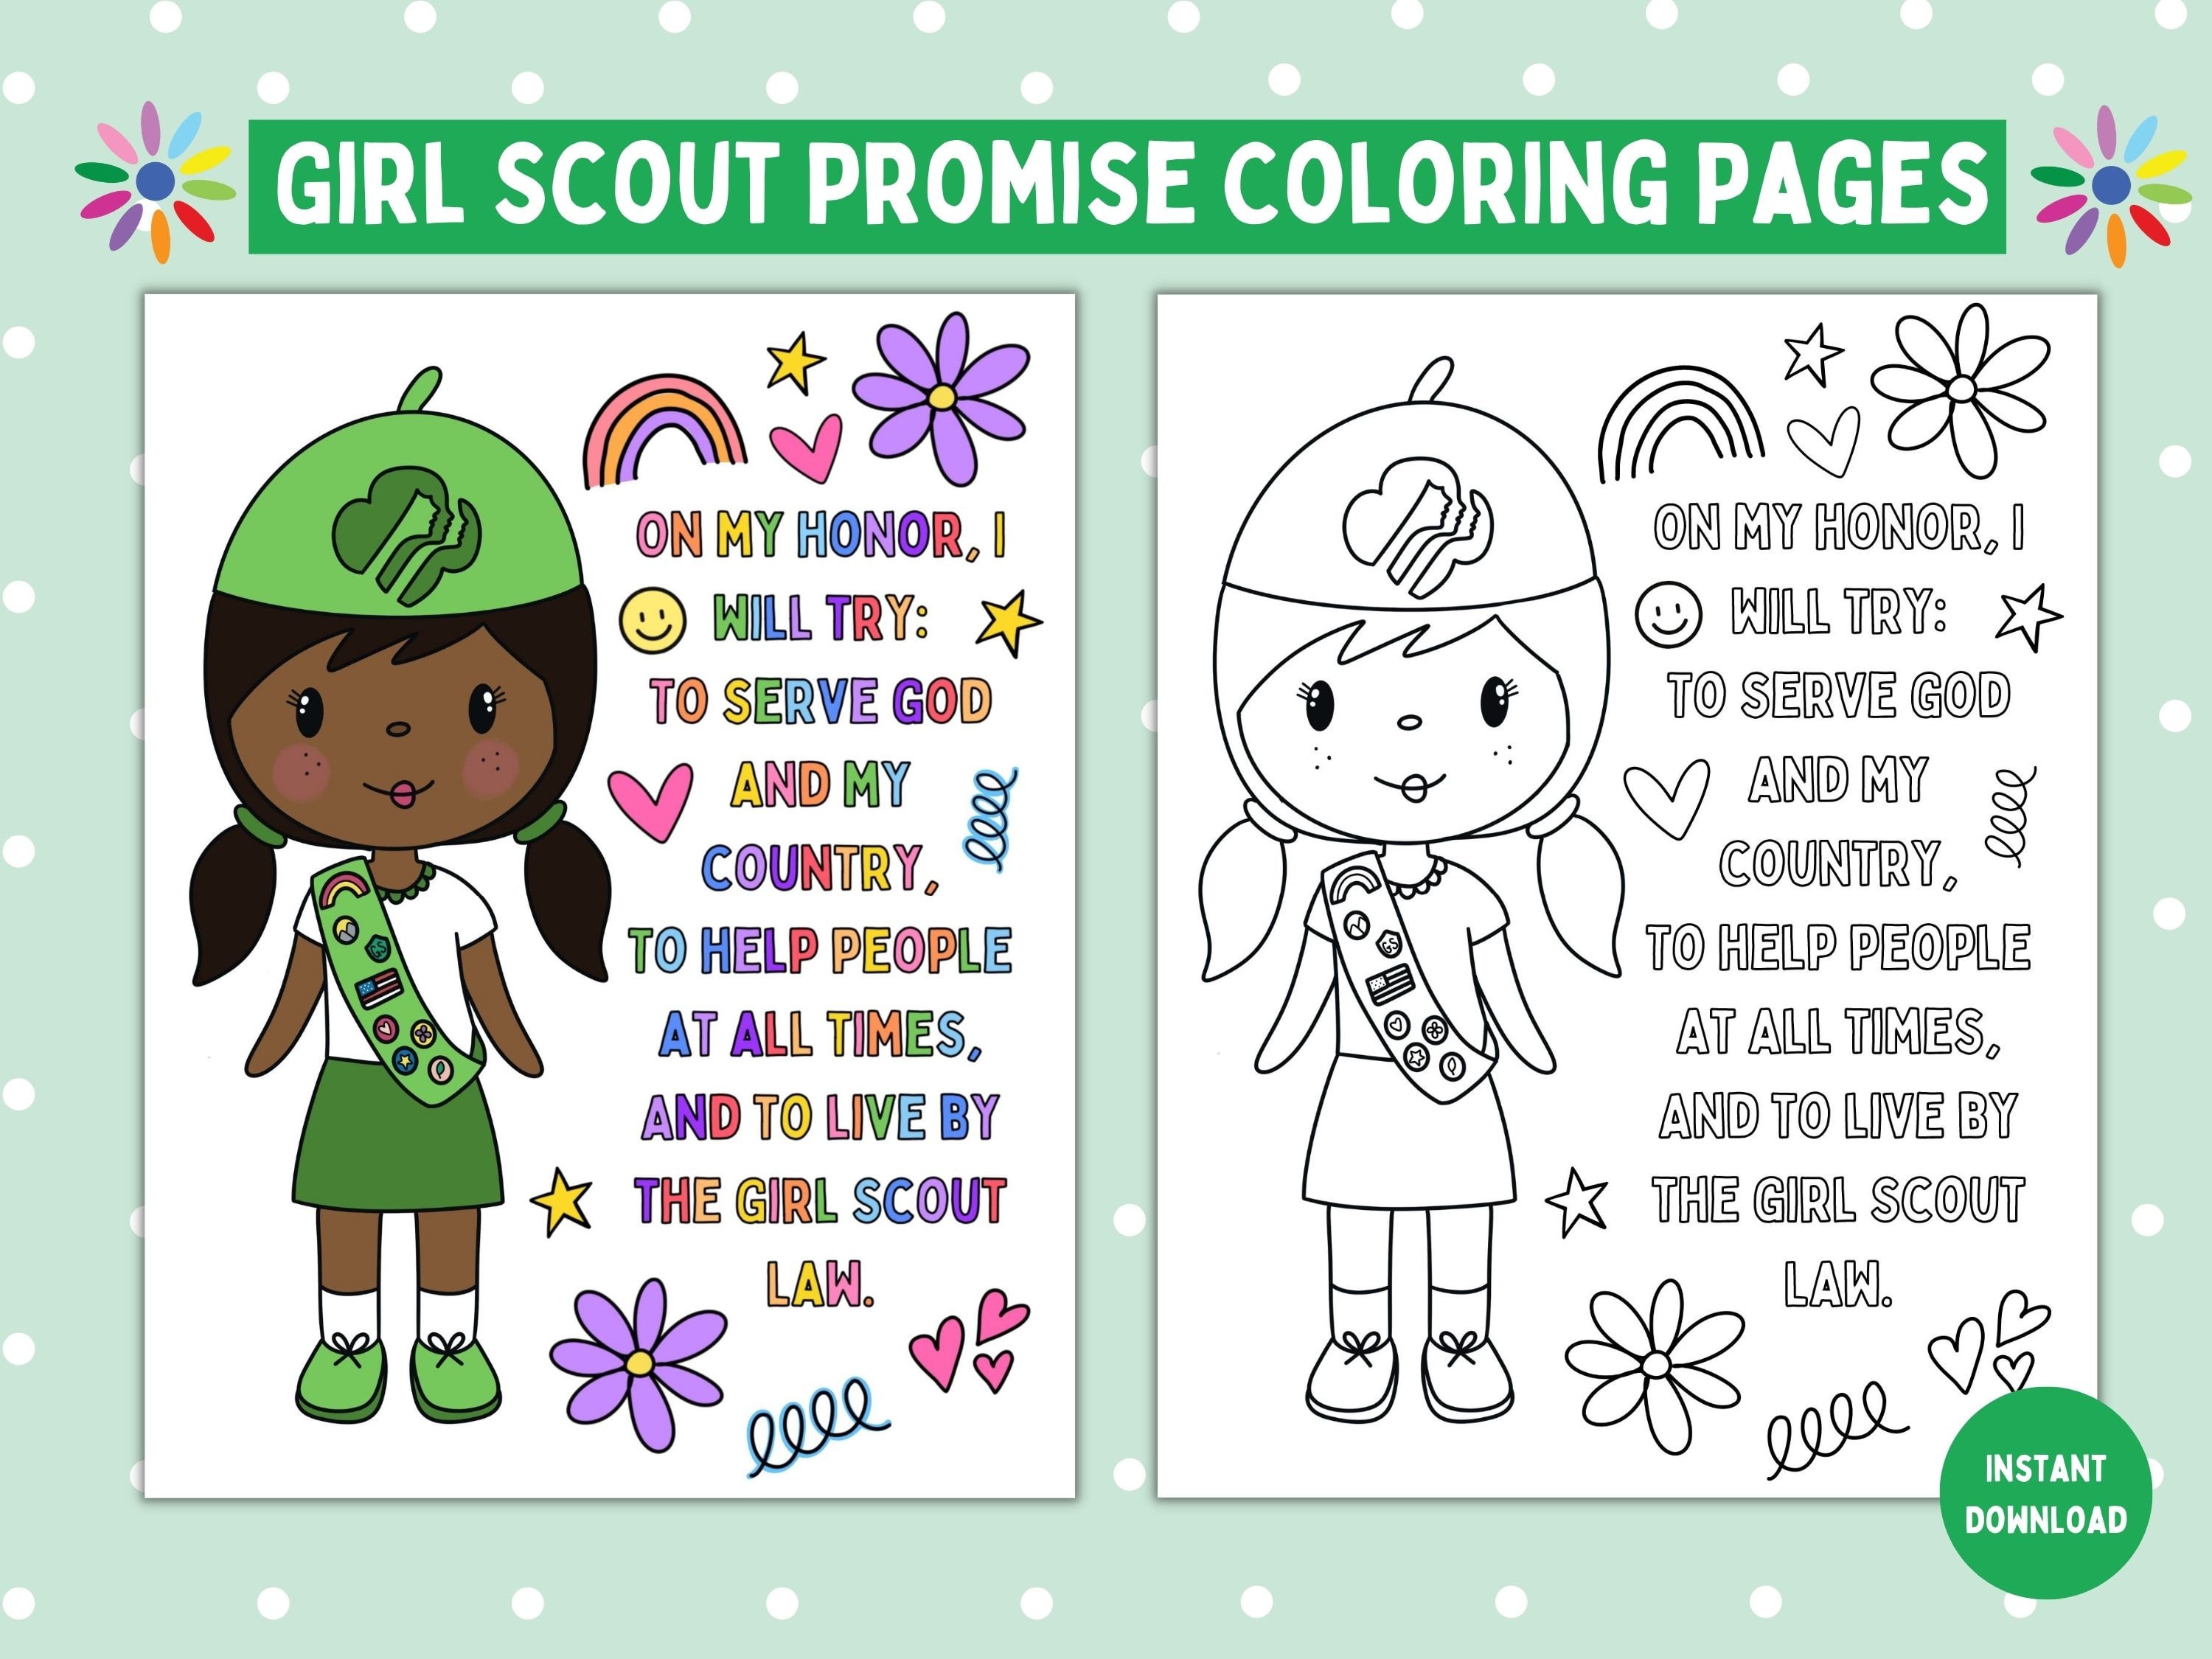 girl-scout-promise-coloring-sheet